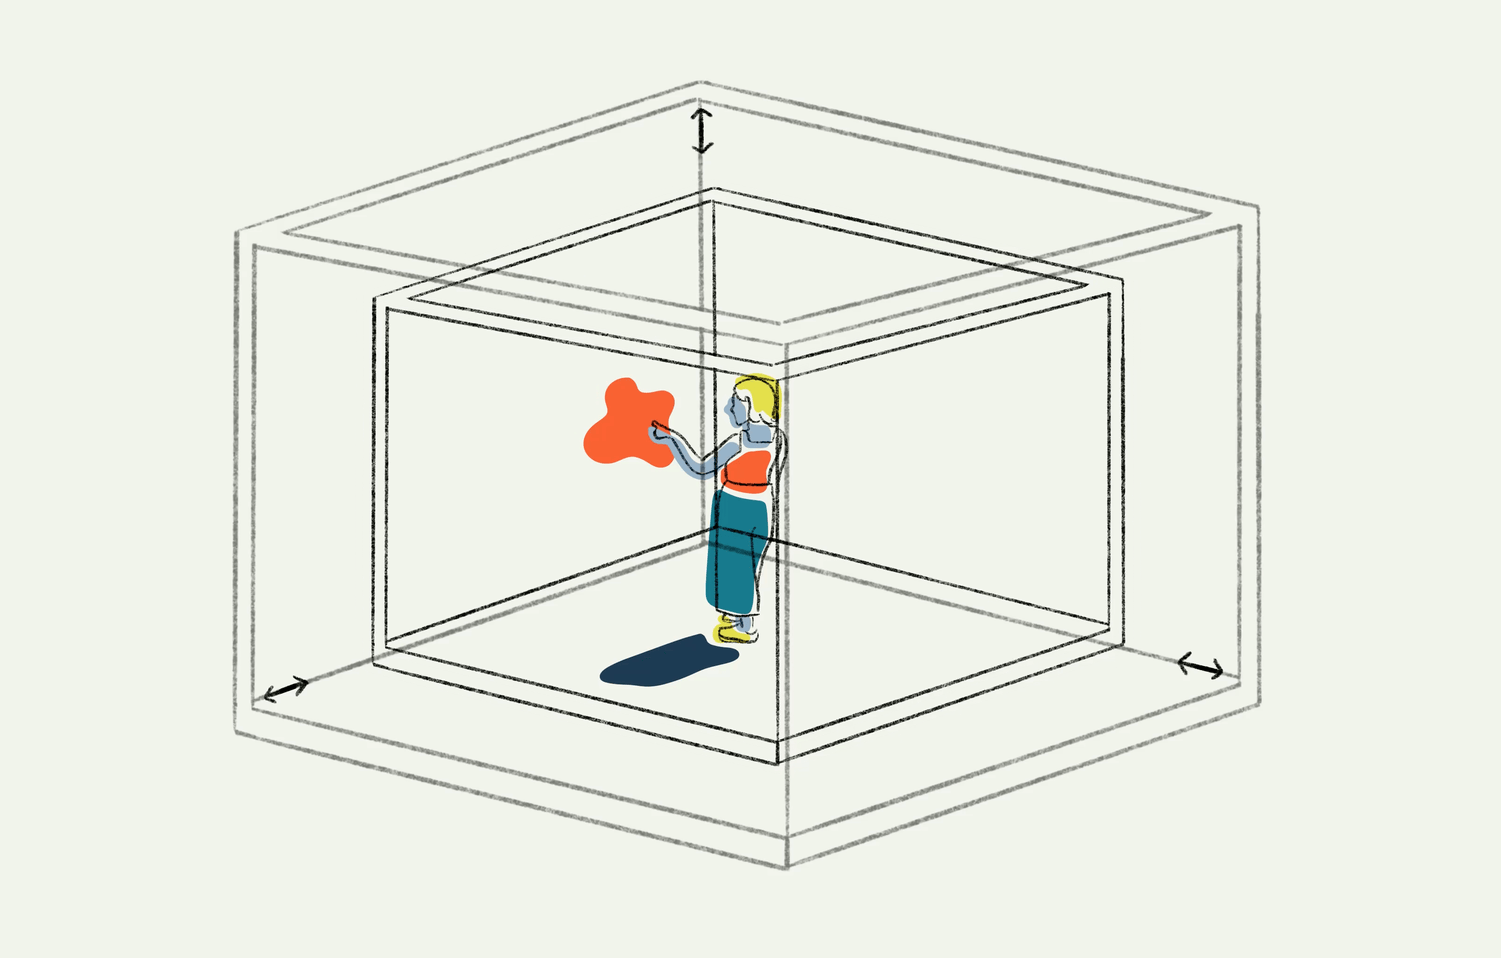 Sketch of a woman in a 3D environment that is growing and shrinking